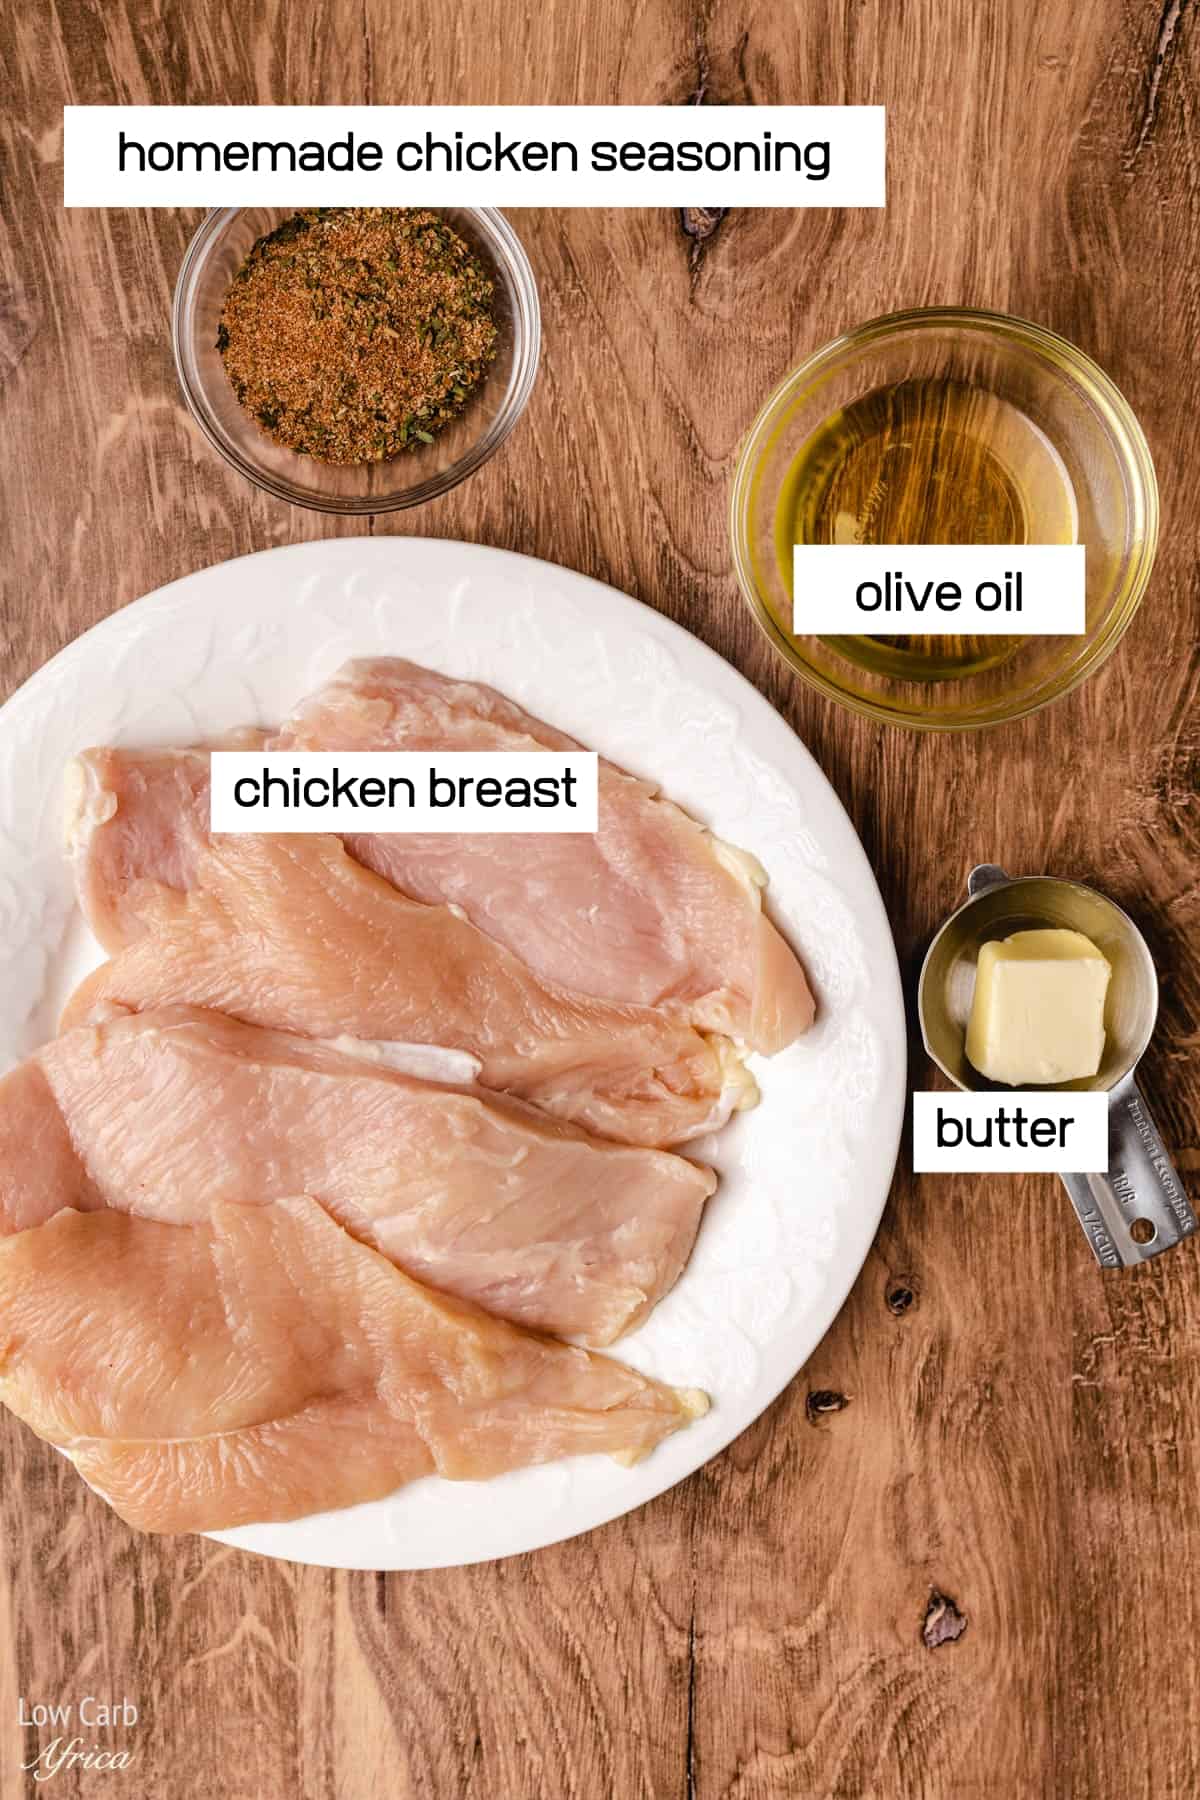 Ingredients for frying chicken breast